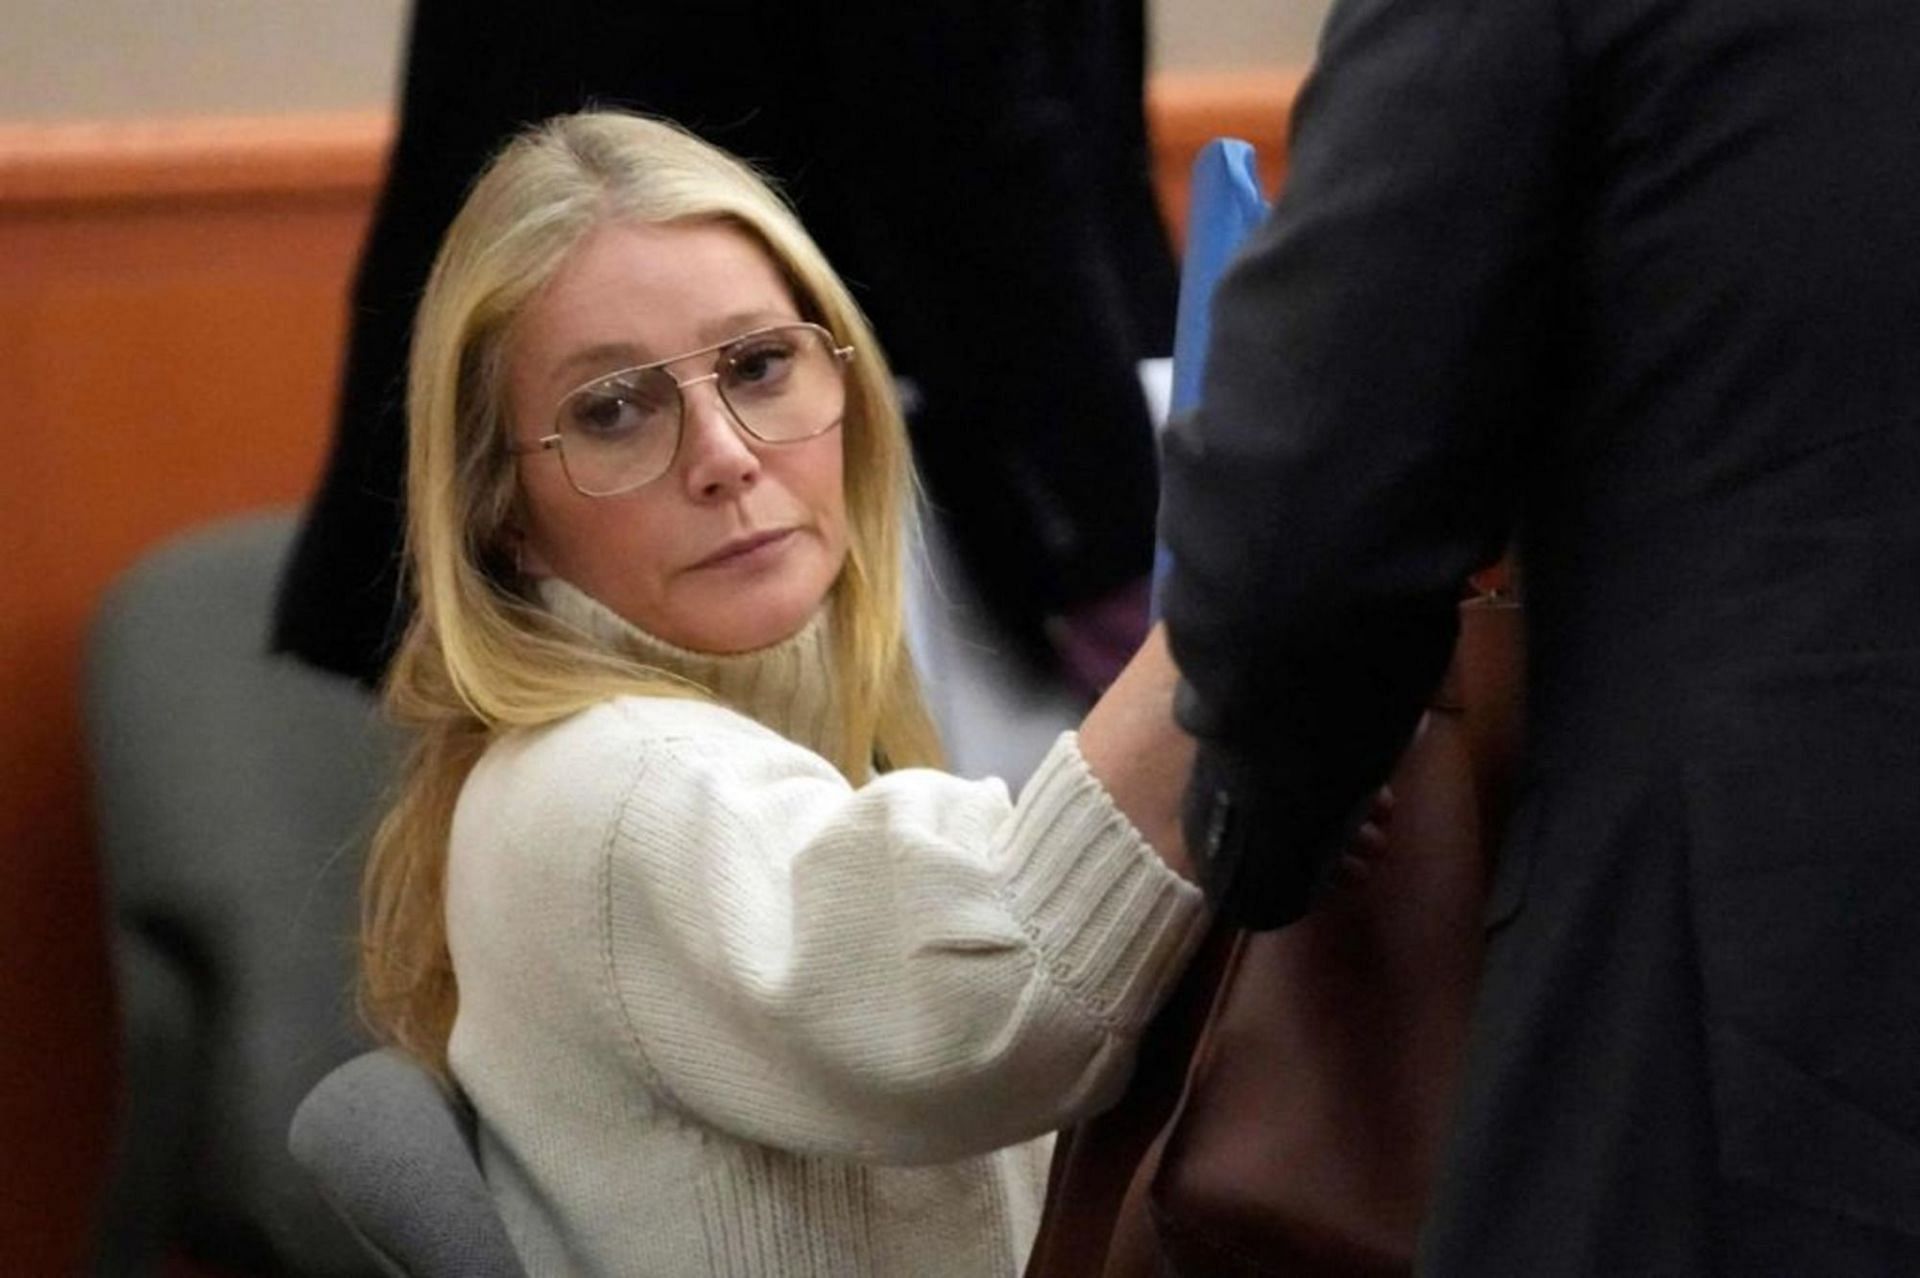 Gwyneth Paltrow compared to Jeffrey Dahmer due to similar glasses (Image via Getty Images)